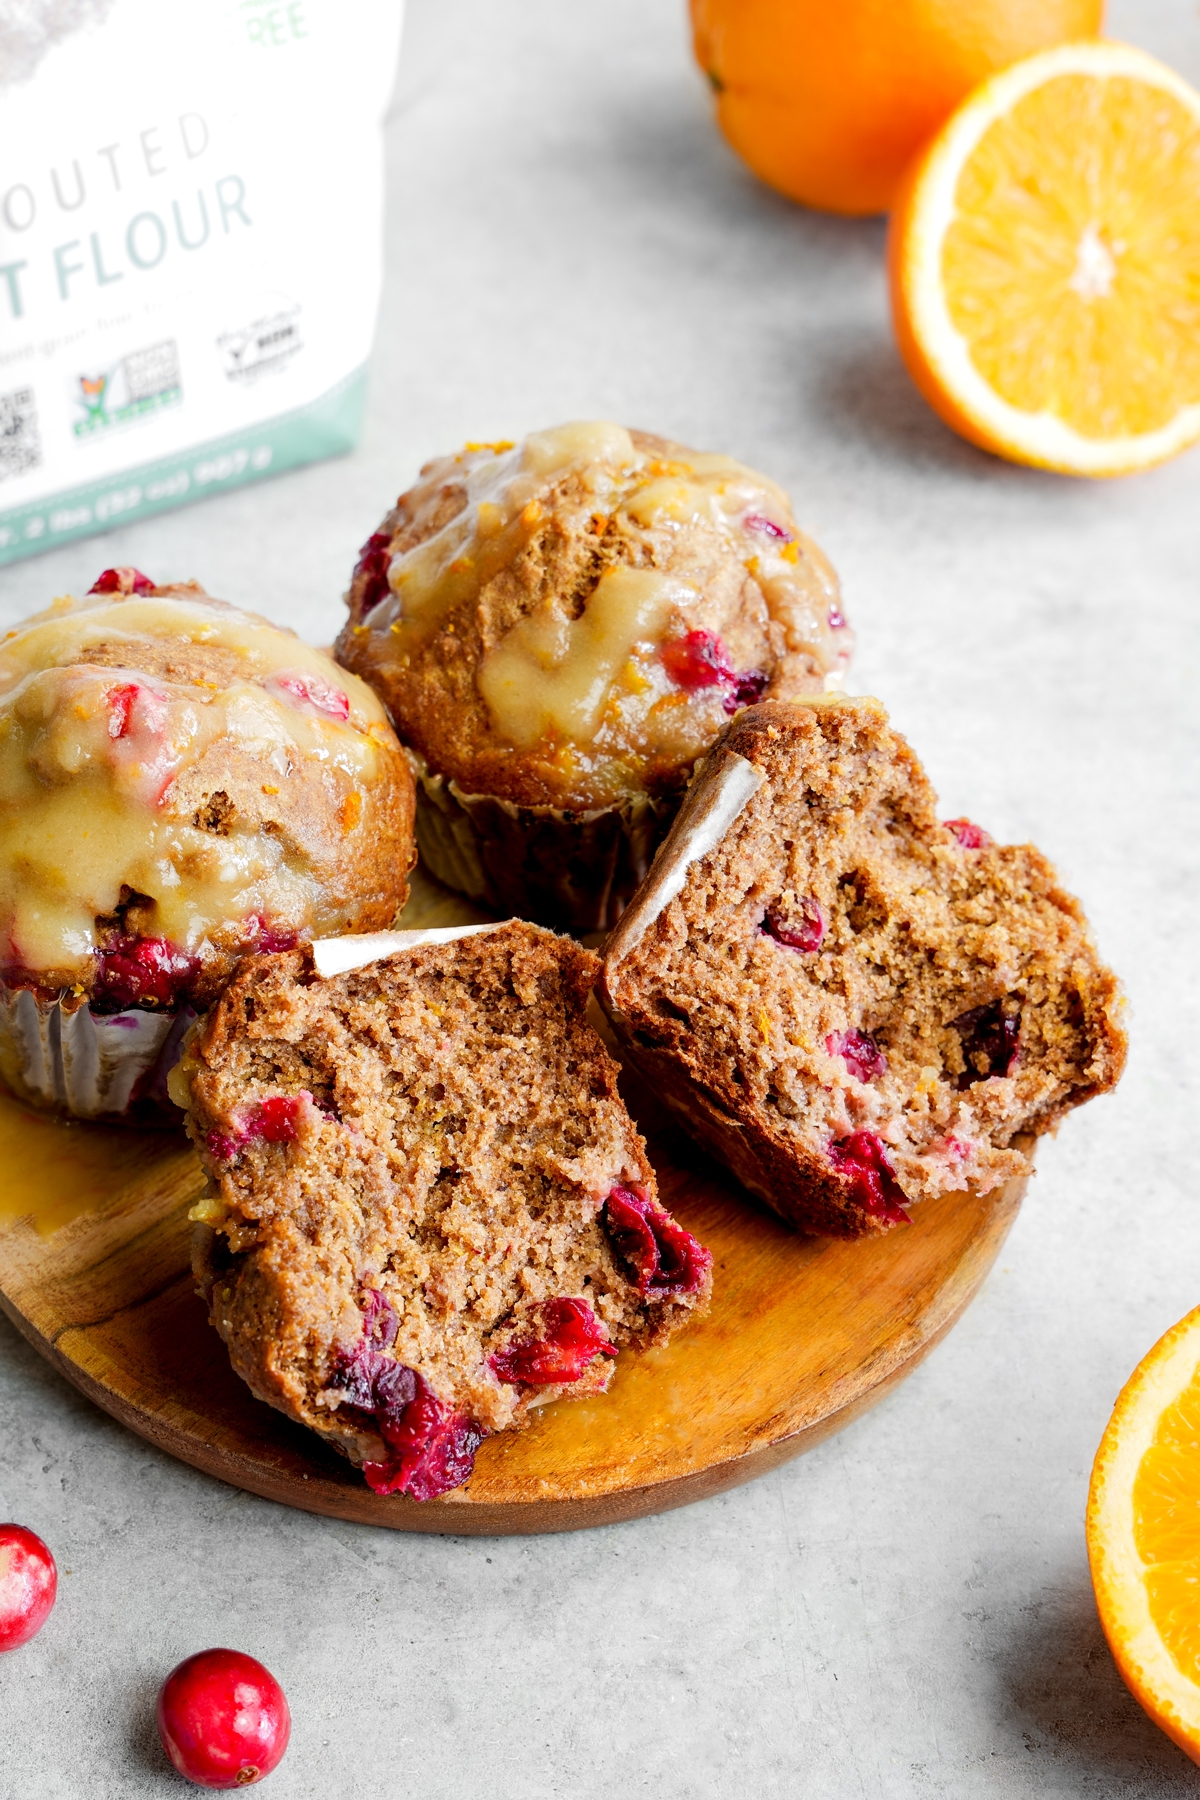 the vegan cranberry orange muffin split in half to show the fluffy texture of the muffins